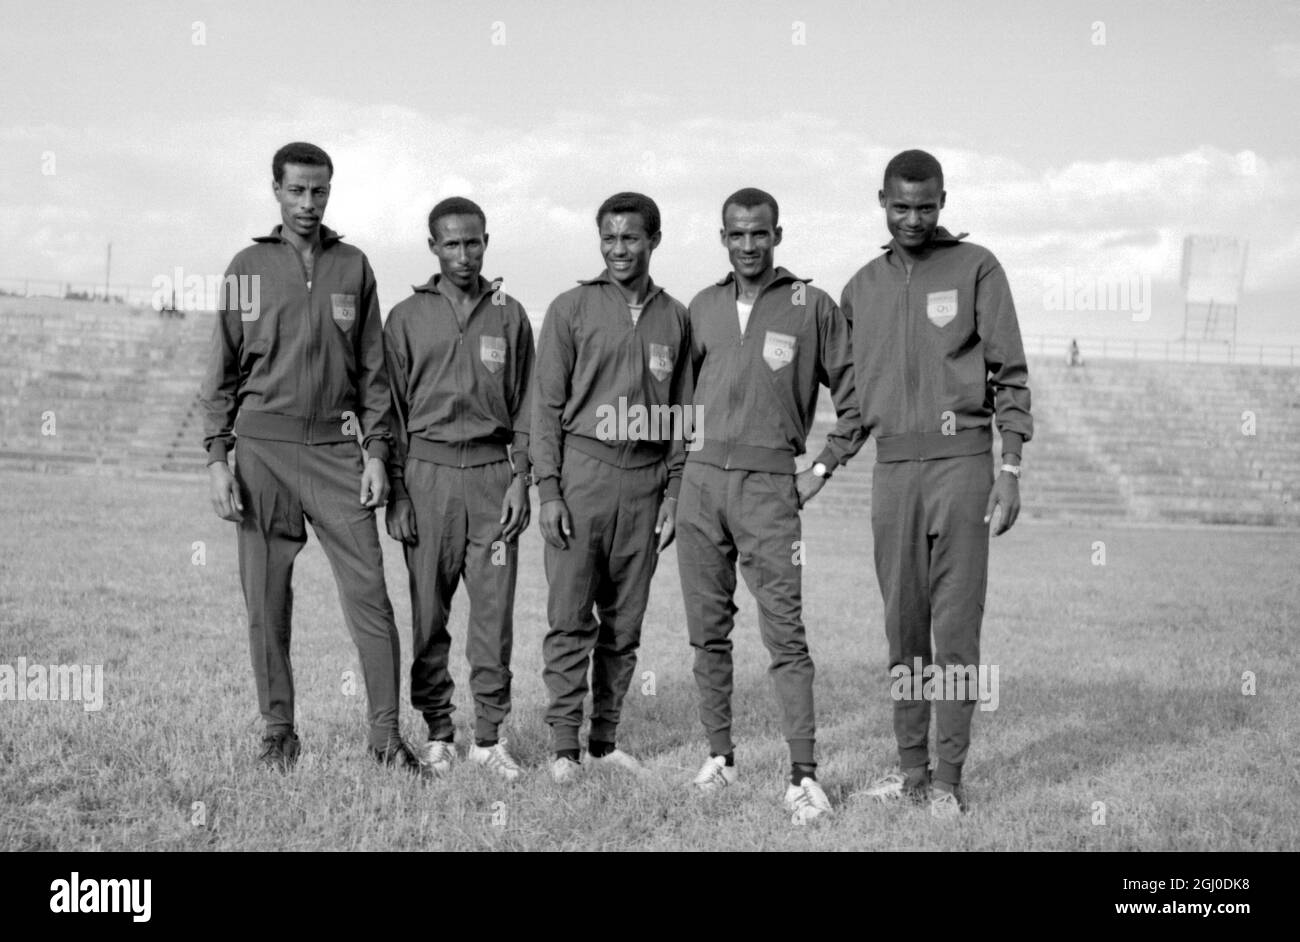 Ethiopian athletes who are to participate in the 1964 Olympic Games at Tokyo are seen in this picture taken during a training session in Addis Ababa. They are Abebe Bikila; Mamo Wolde; Demissi Wolde; Subsibe Mamo and Tegegn Bezabeh. 25th September 1964. Stock Photo